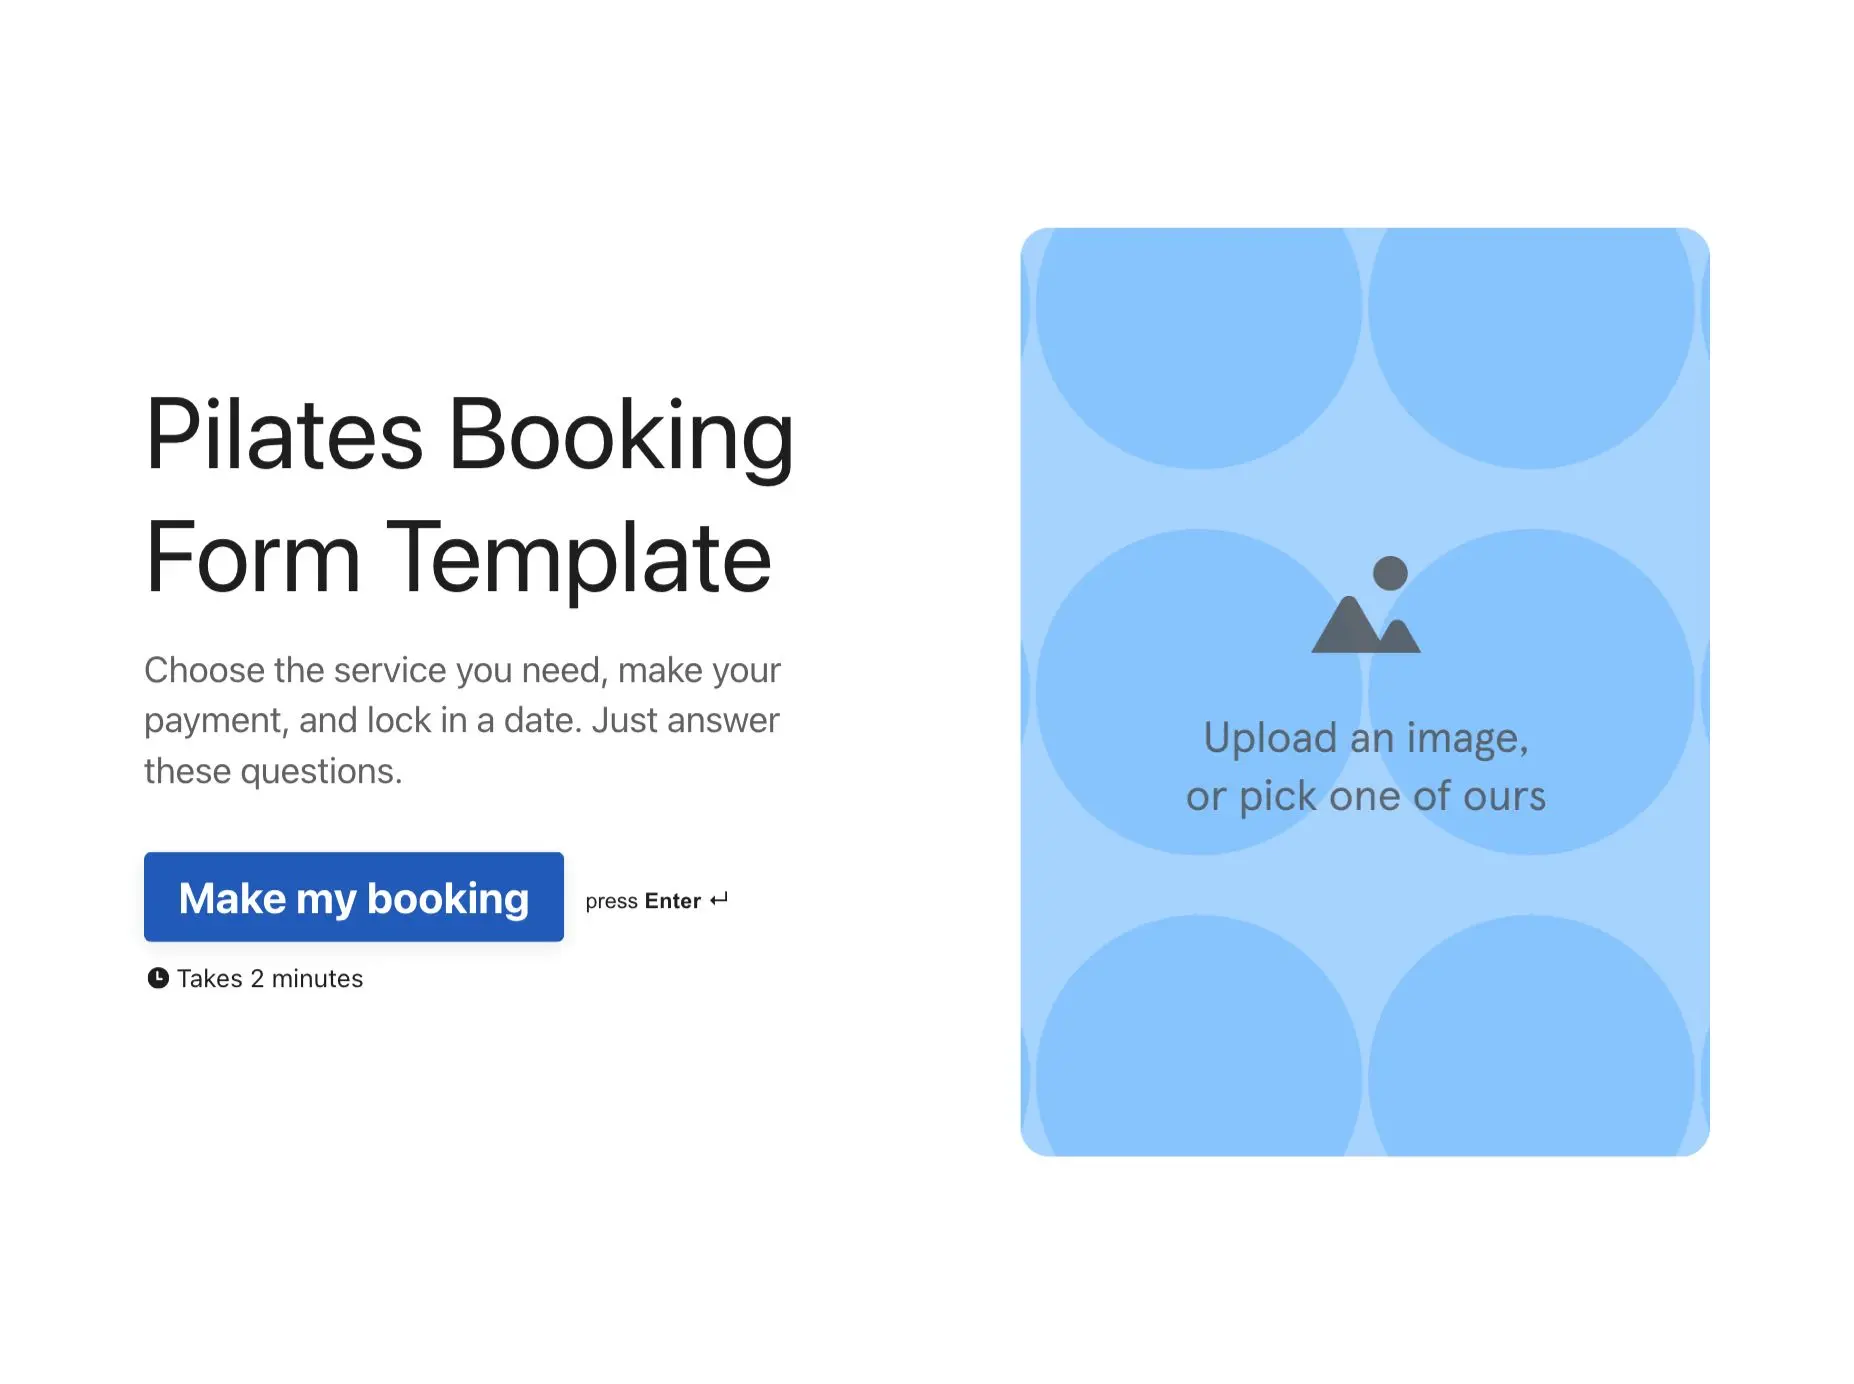 Pilates Booking Form Template Hero